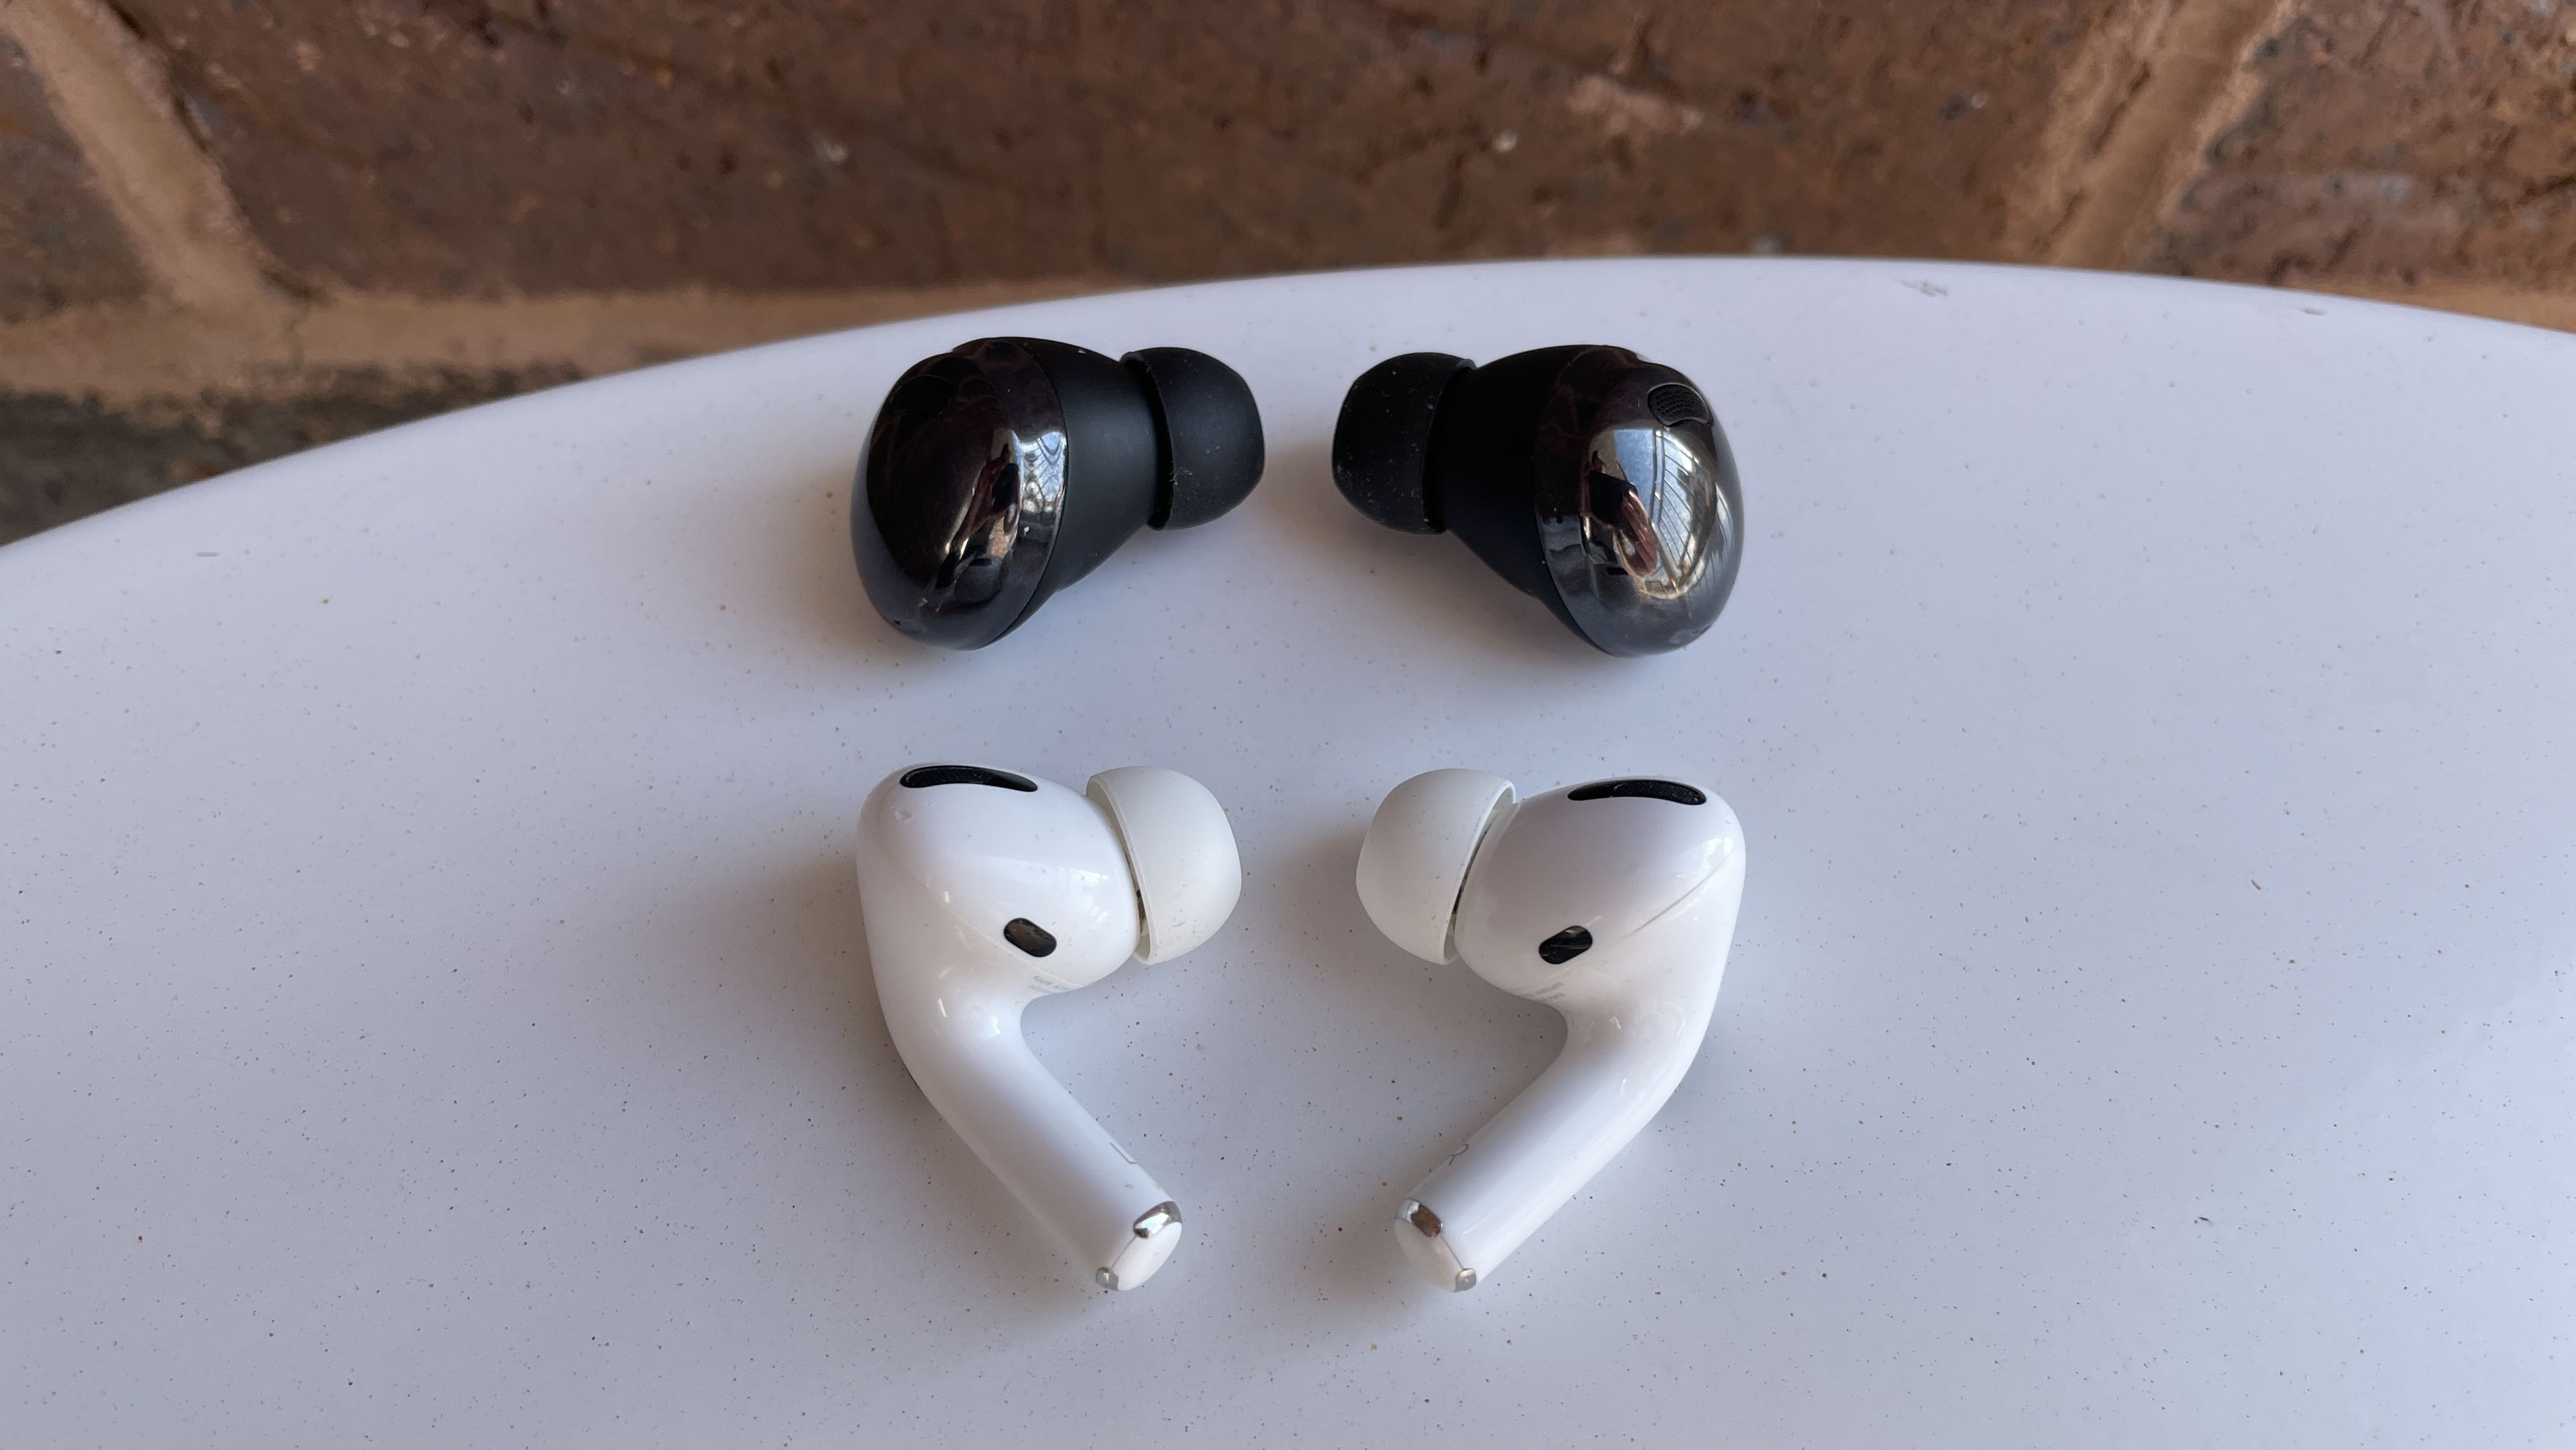 Galaxy Buds Pro Review: Sound quality over comfort, galaxy buds pro